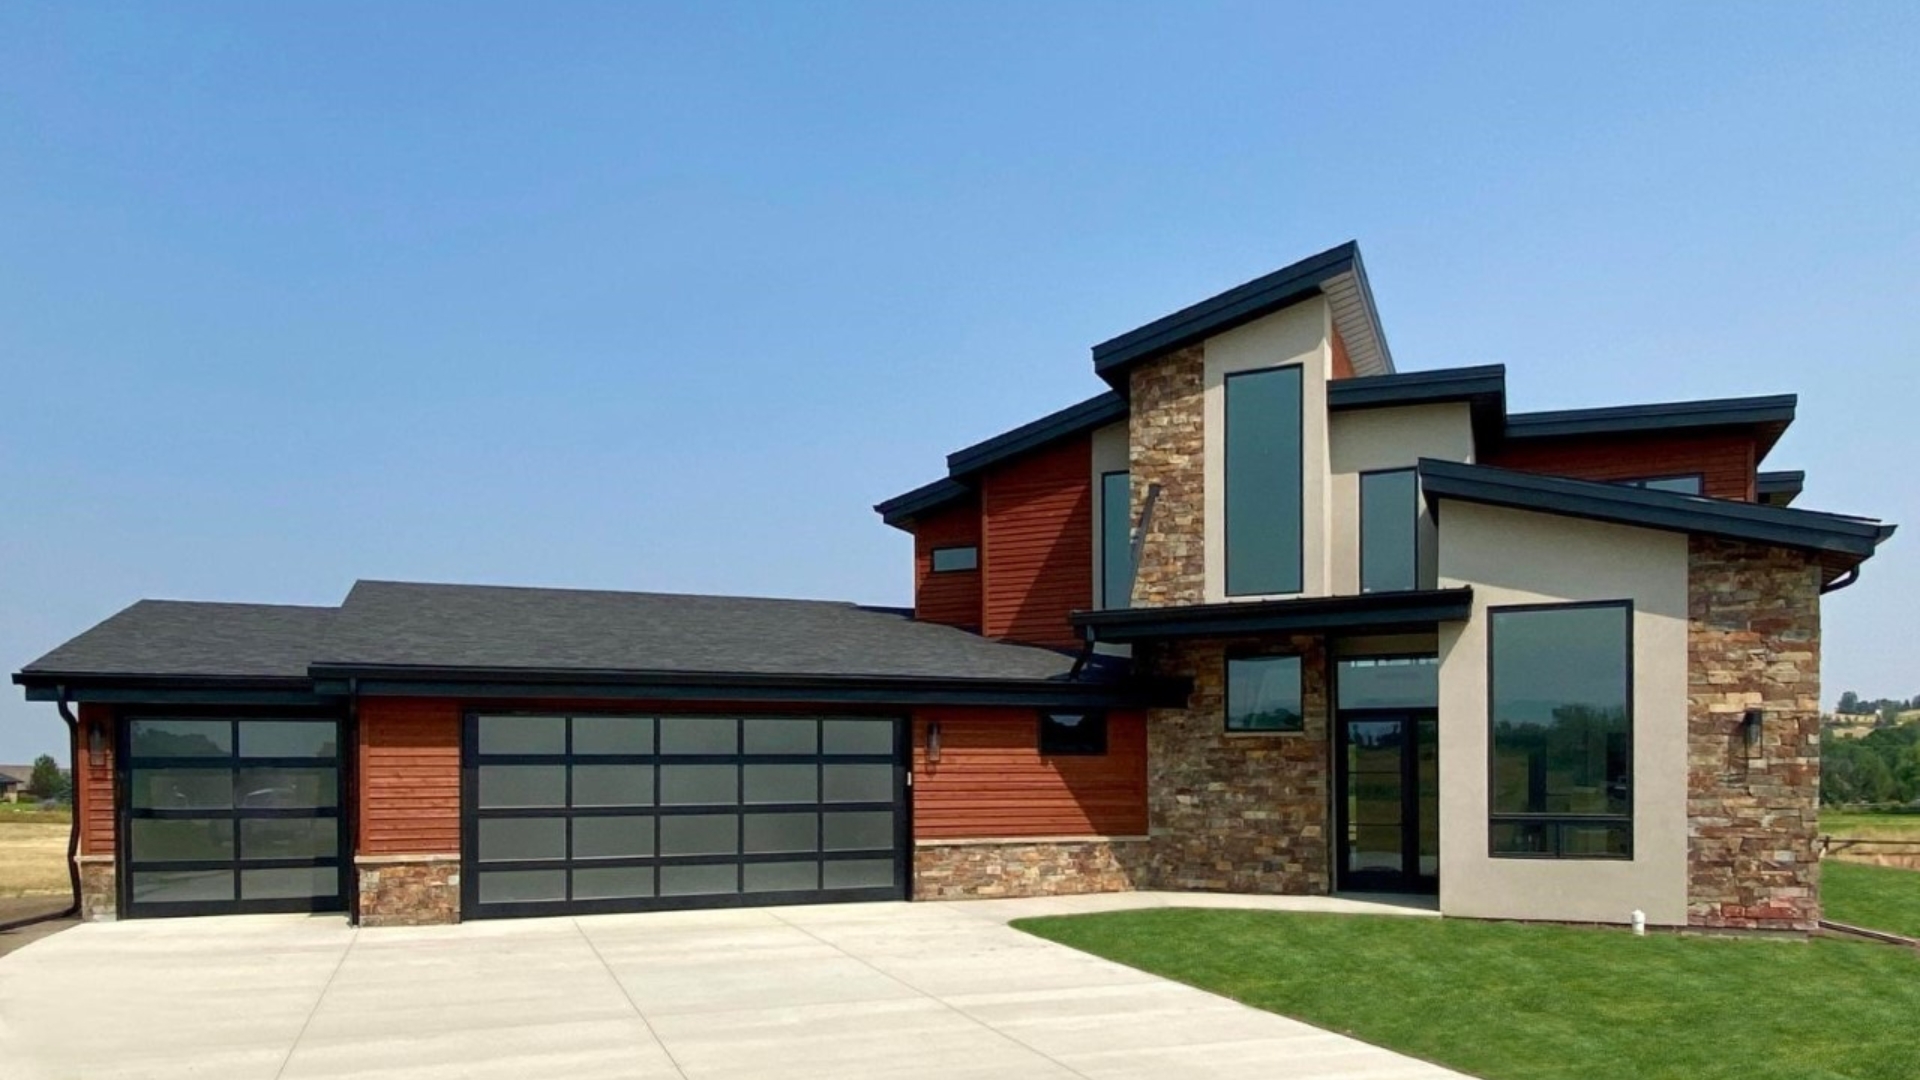 A home with garage door panels made of glass